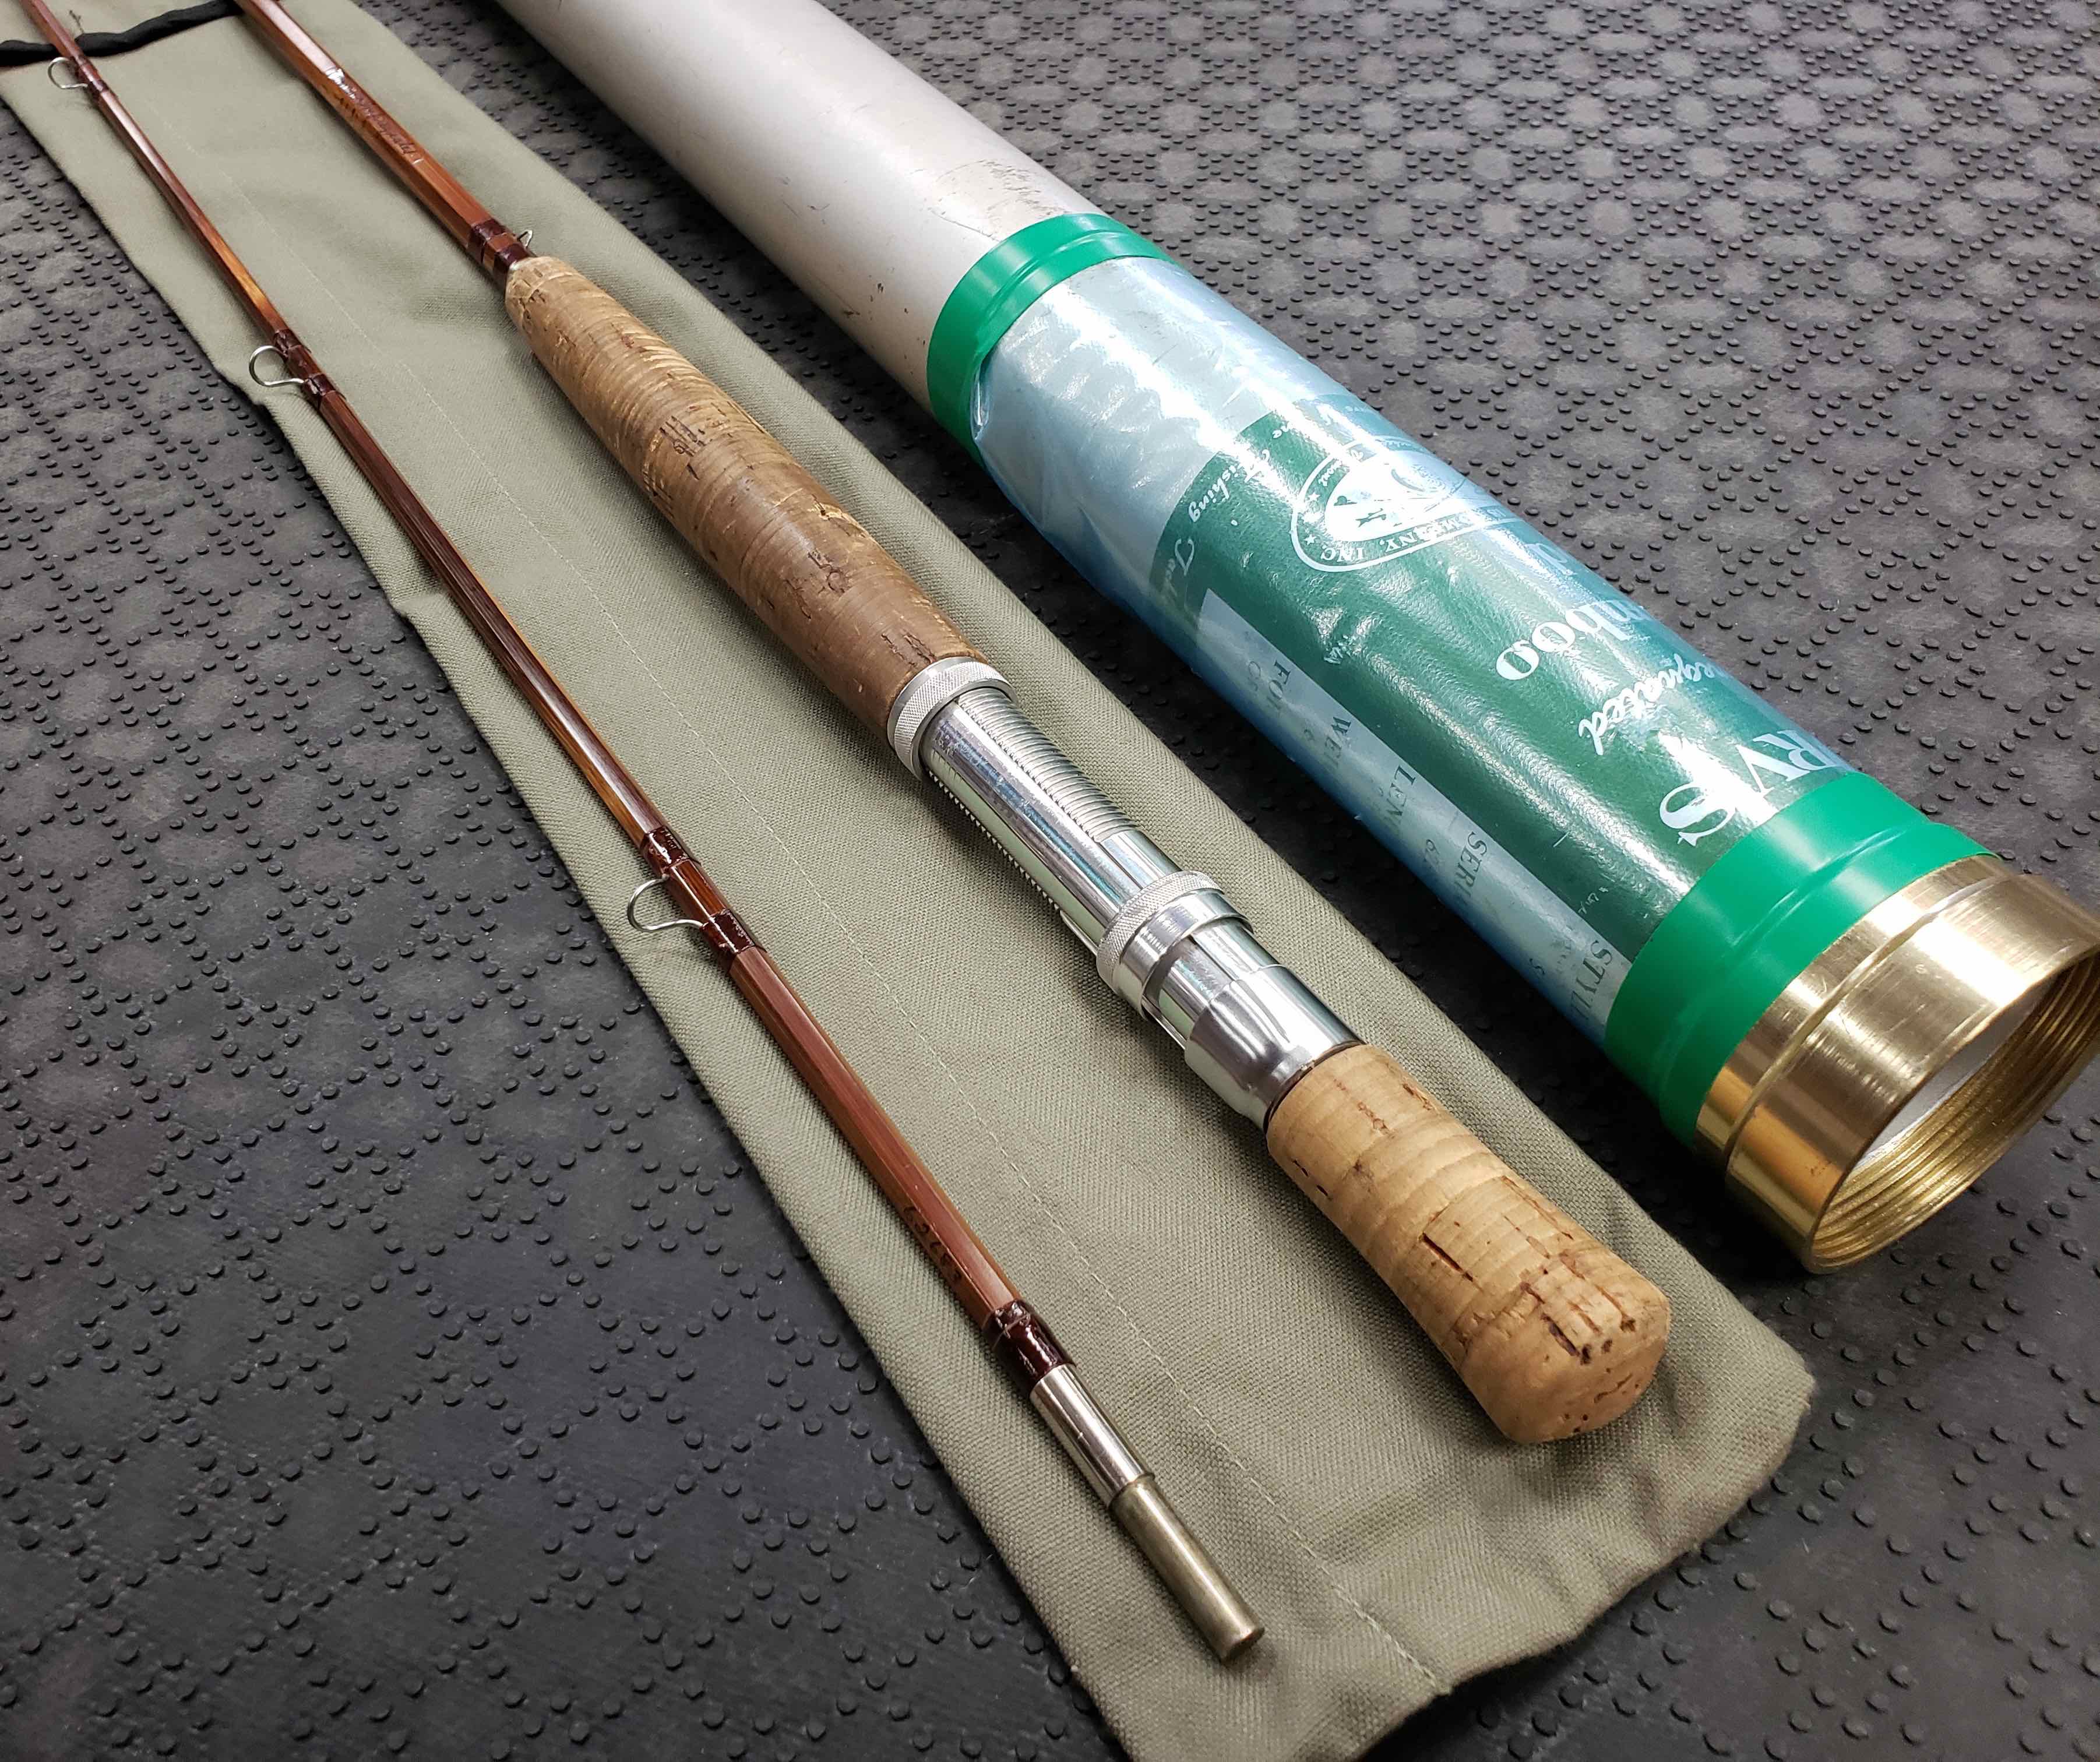 https://thefirstcast.ca/wp-content/uploads/2019/04/Orvis-Impregnated-Bamboo-Fly-Rod-2Piece-8-foot-9inch-10weight-CC.jpg